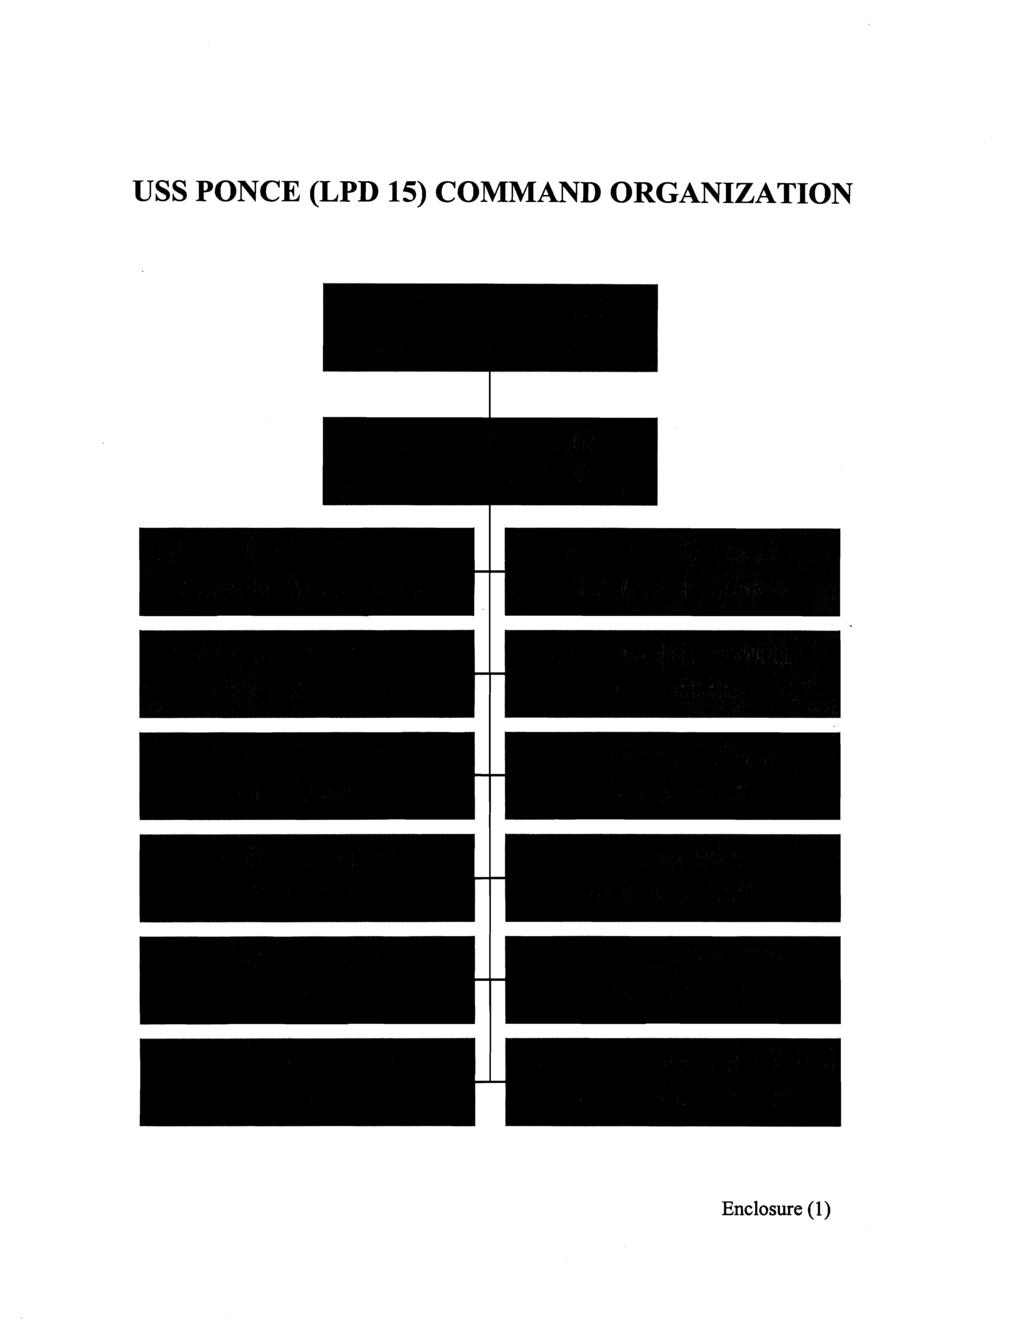 USS PONCE (LPD 15) COMMAND